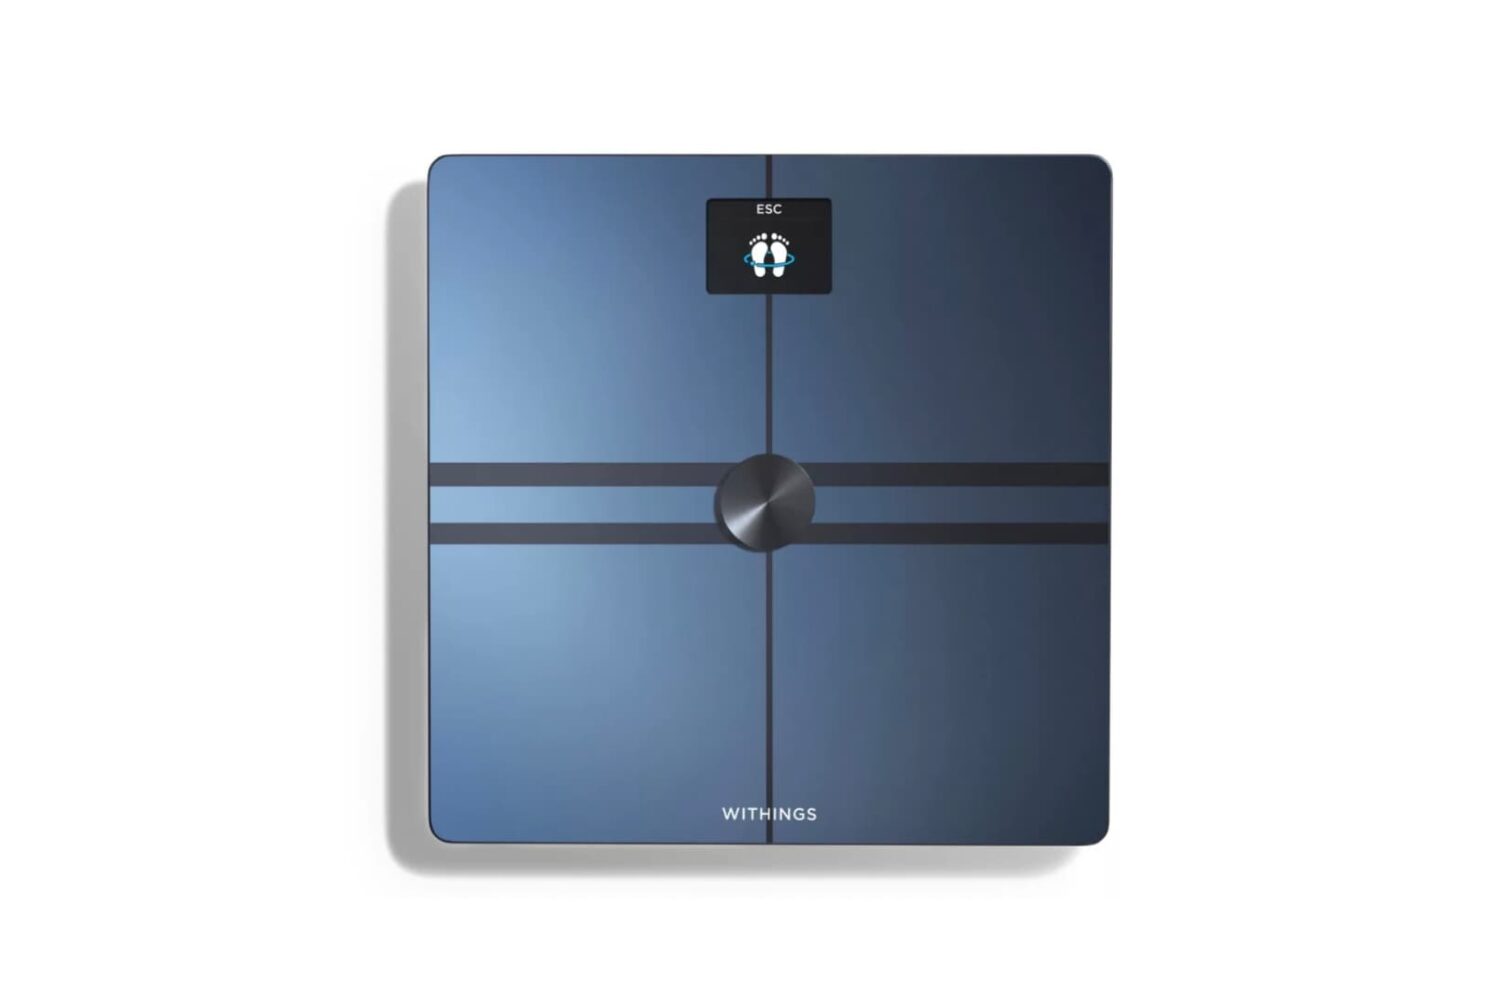 Withings Body Pro 2 smart scale.